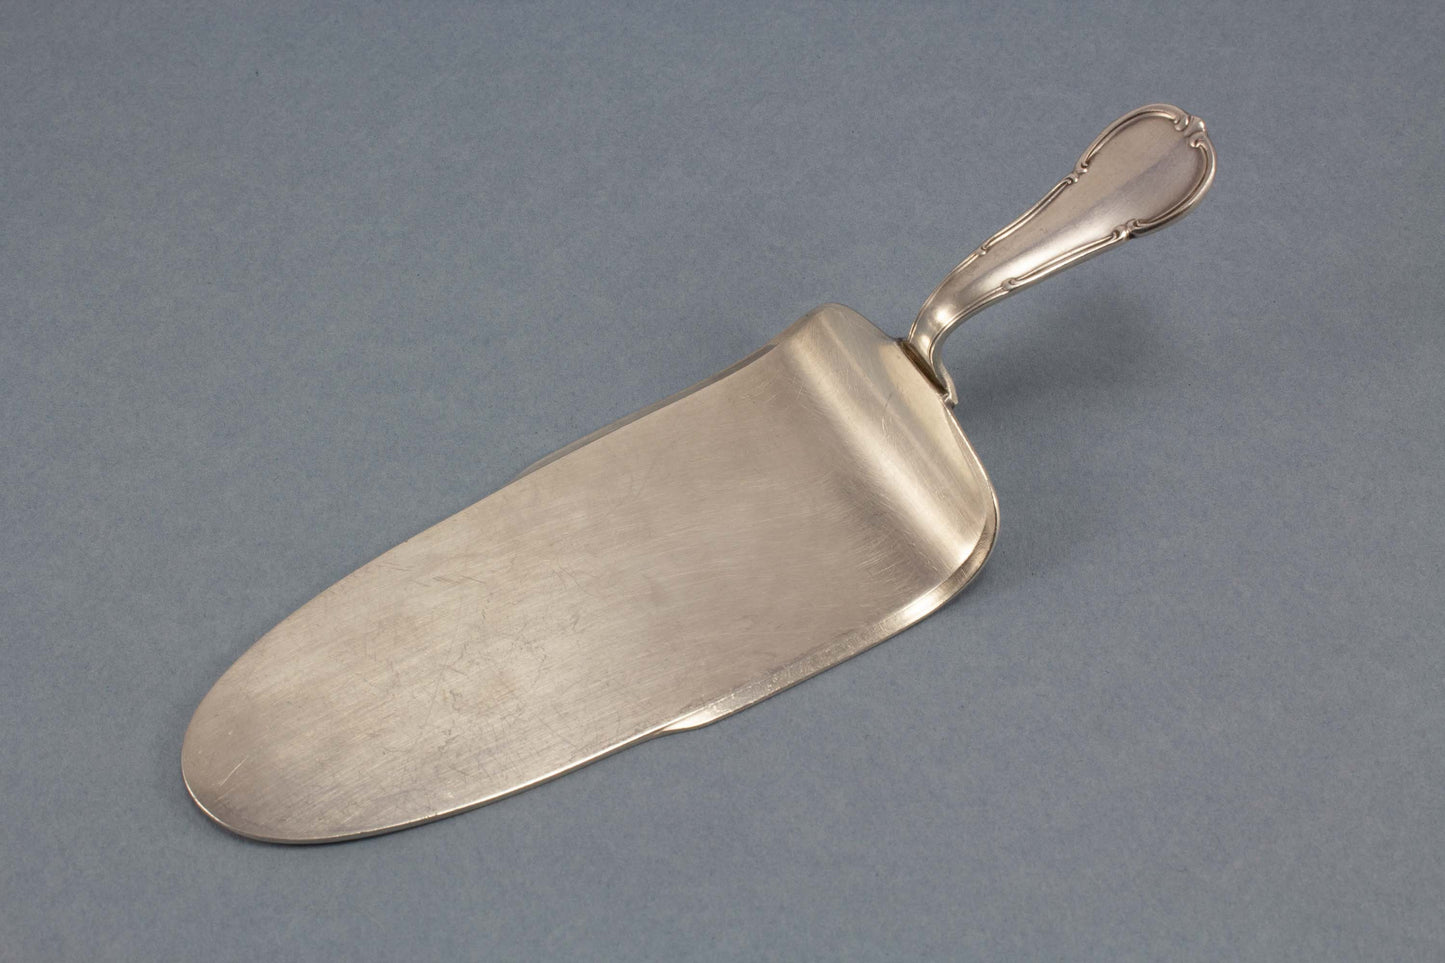 Silver-plated pastry server, WMF 3200